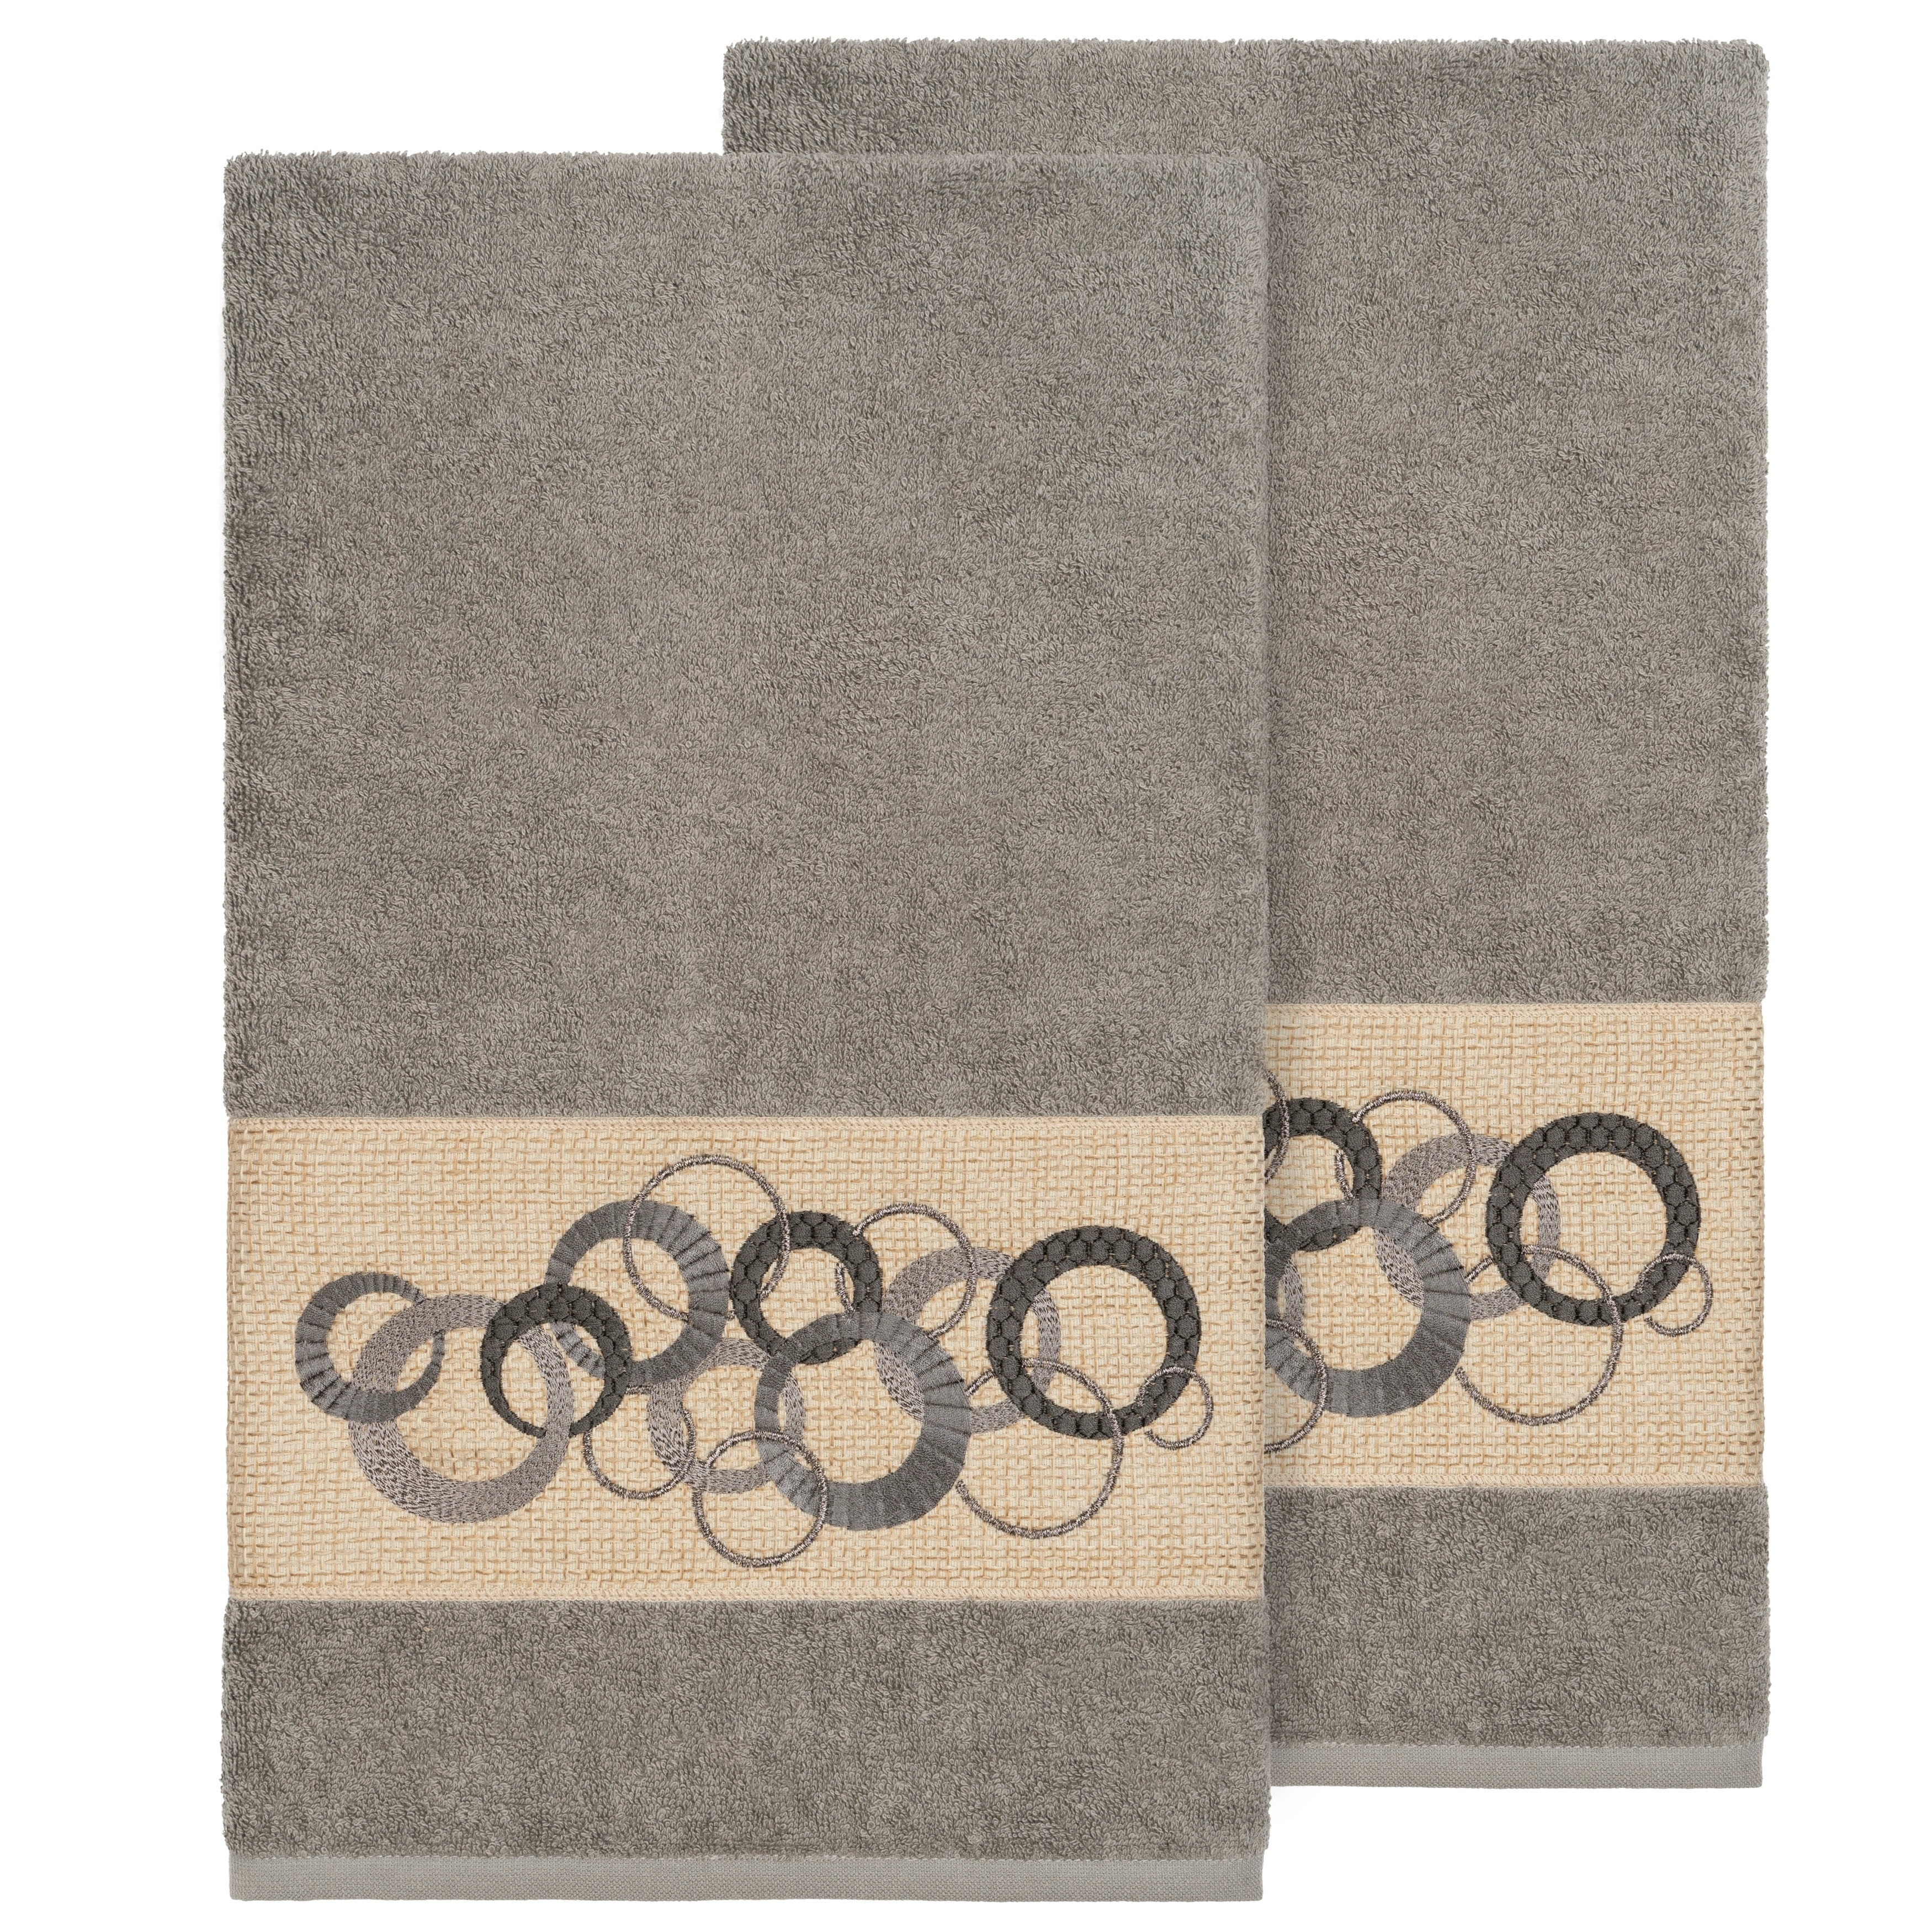 https://ak1.ostkcdn.com/images/products/22160847/Authentic-Hotel-and-Spa-Turkish-Cotton-Circles-Embroidered-Dark-Grey-2-piece-Bath-Towel-Set-af69a15f-216c-49dc-a829-bc36c145549f.jpg